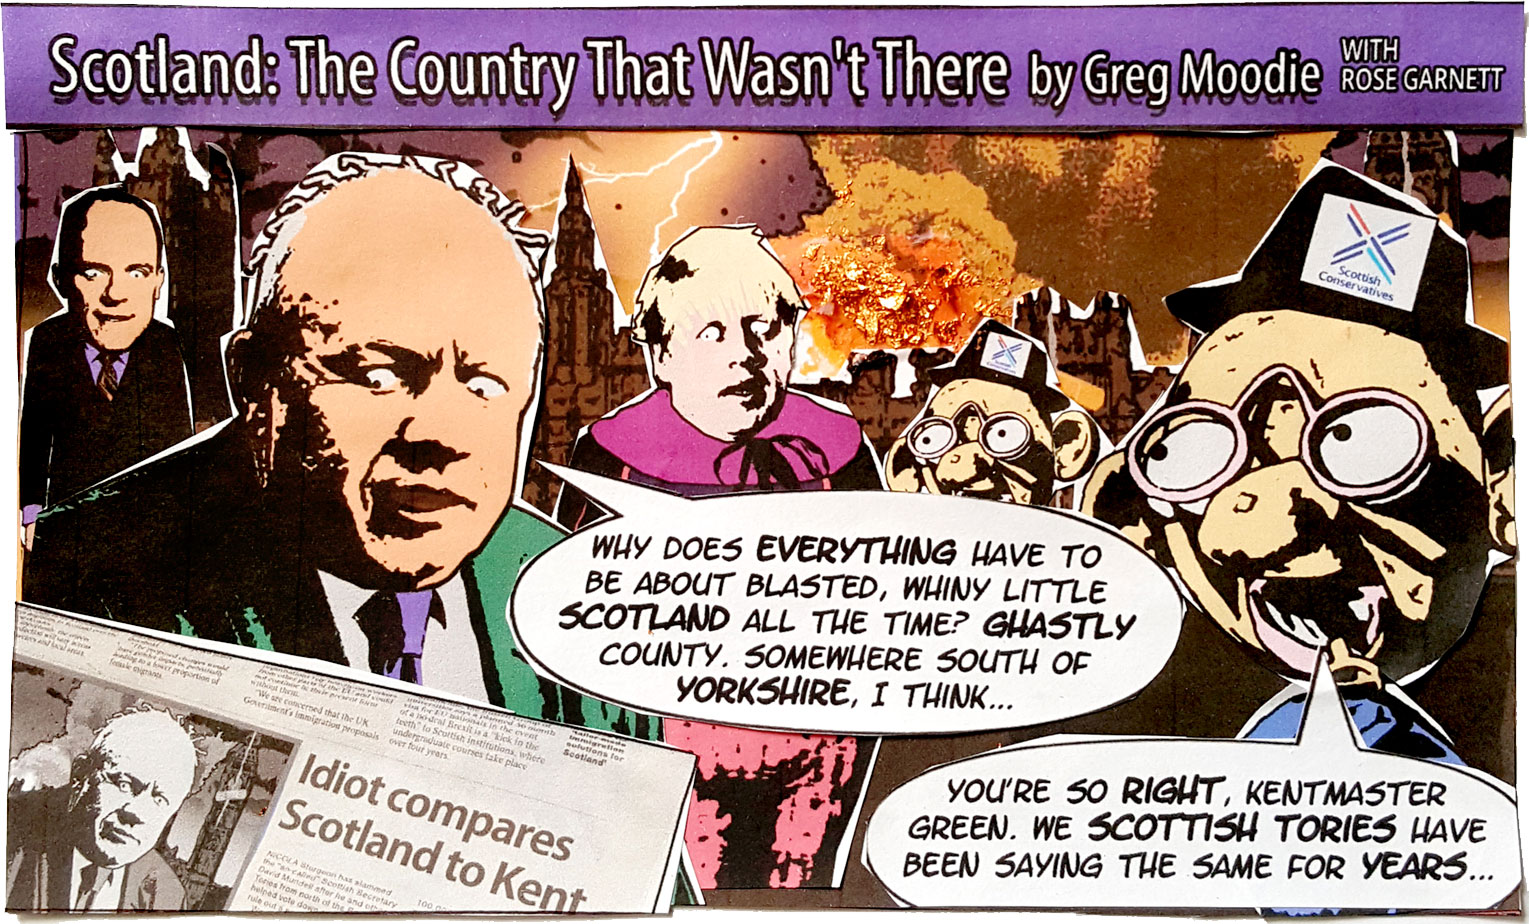 Scotland: The Country That Wasn't There